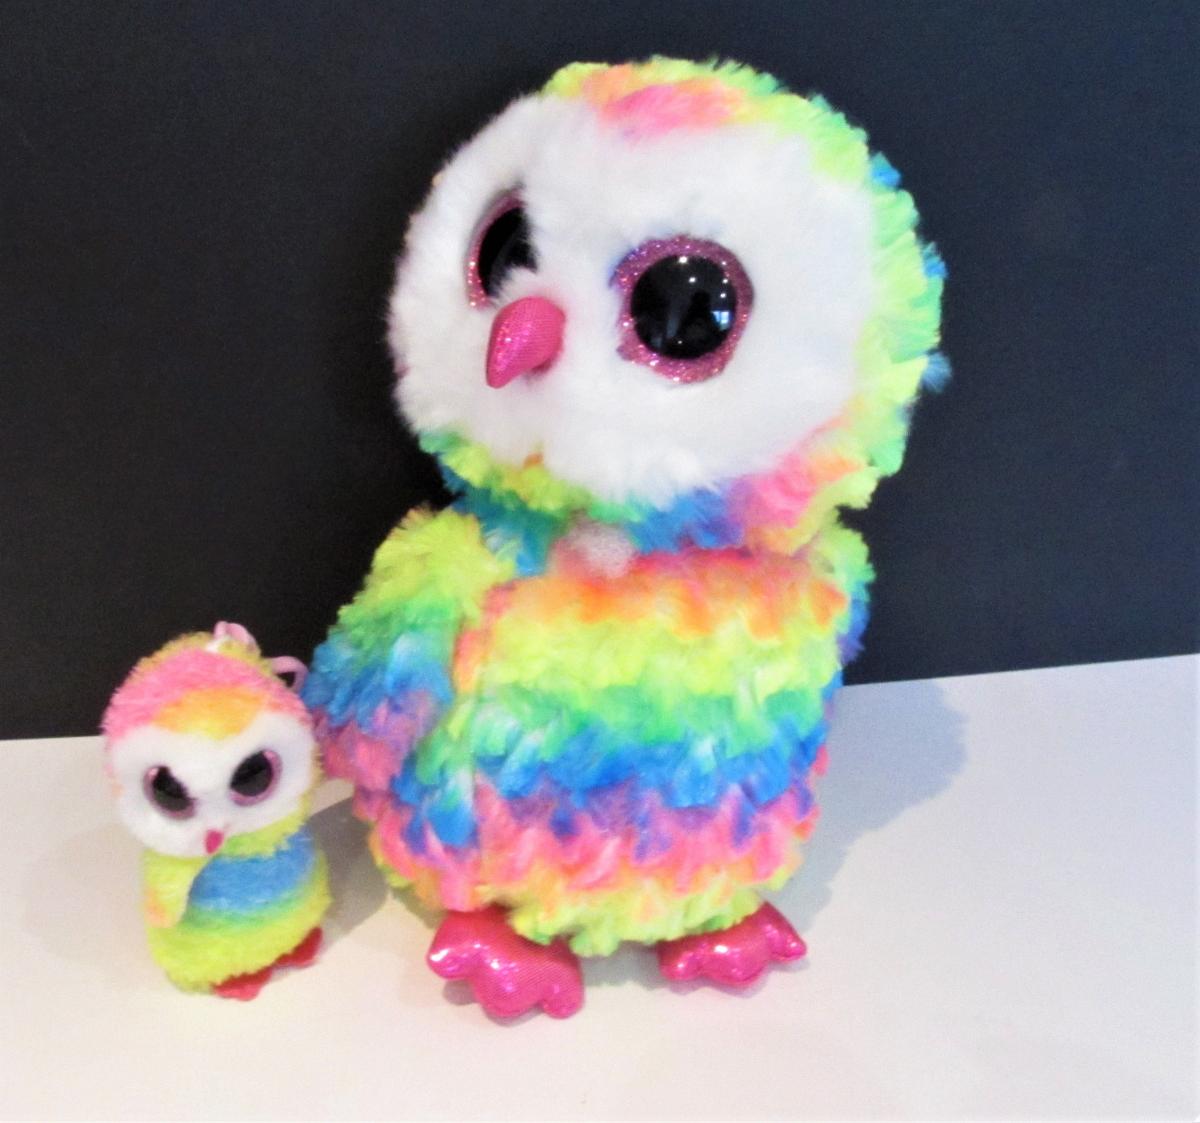 a small stuffed owl toy next to a larger stuffed owl toy